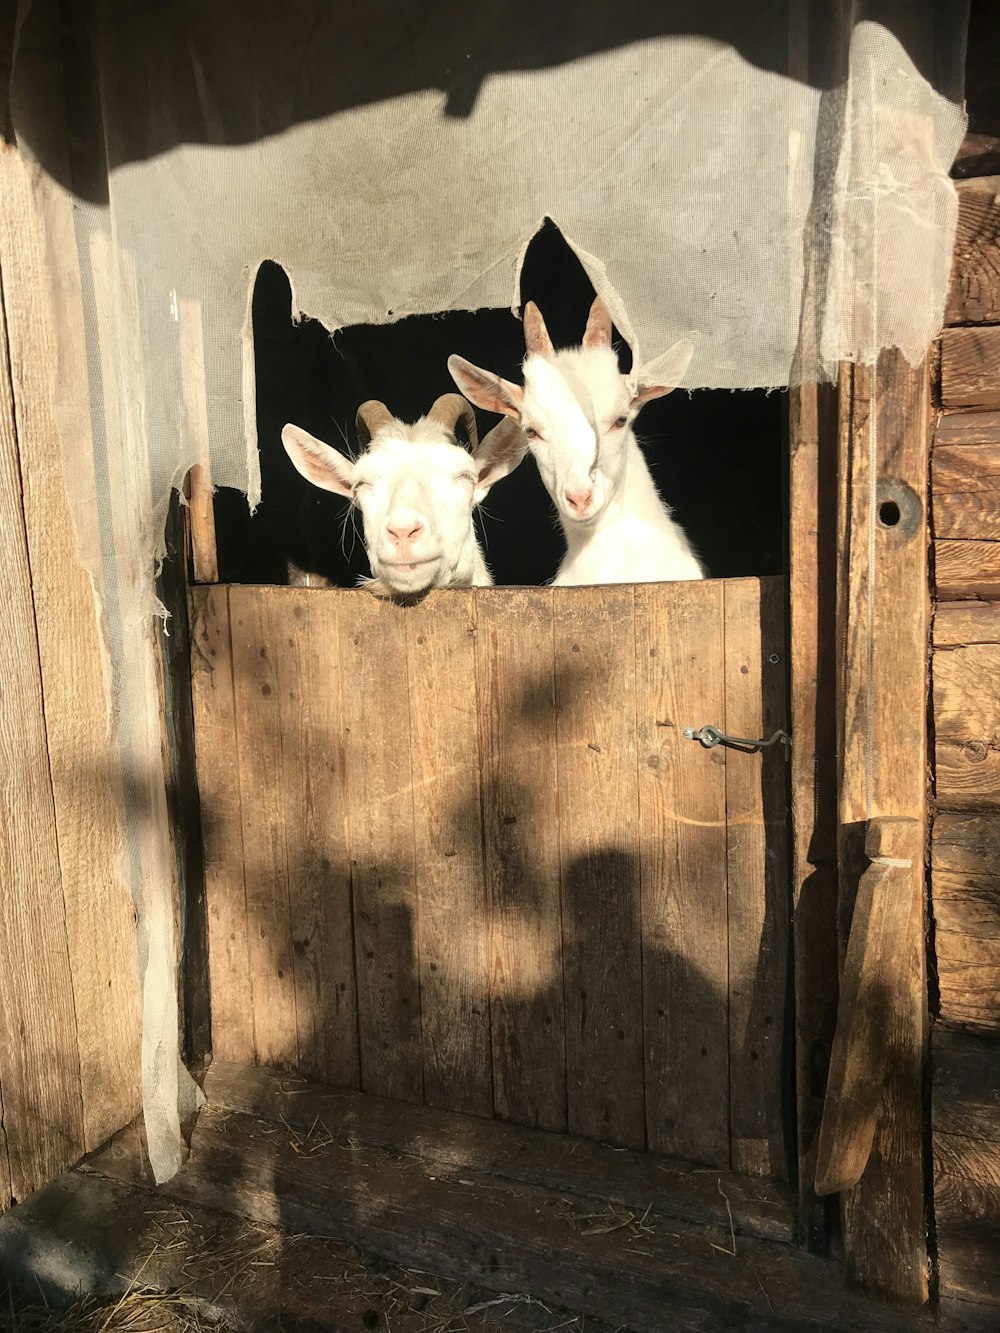 a couple of goats standing inside of a wooden box